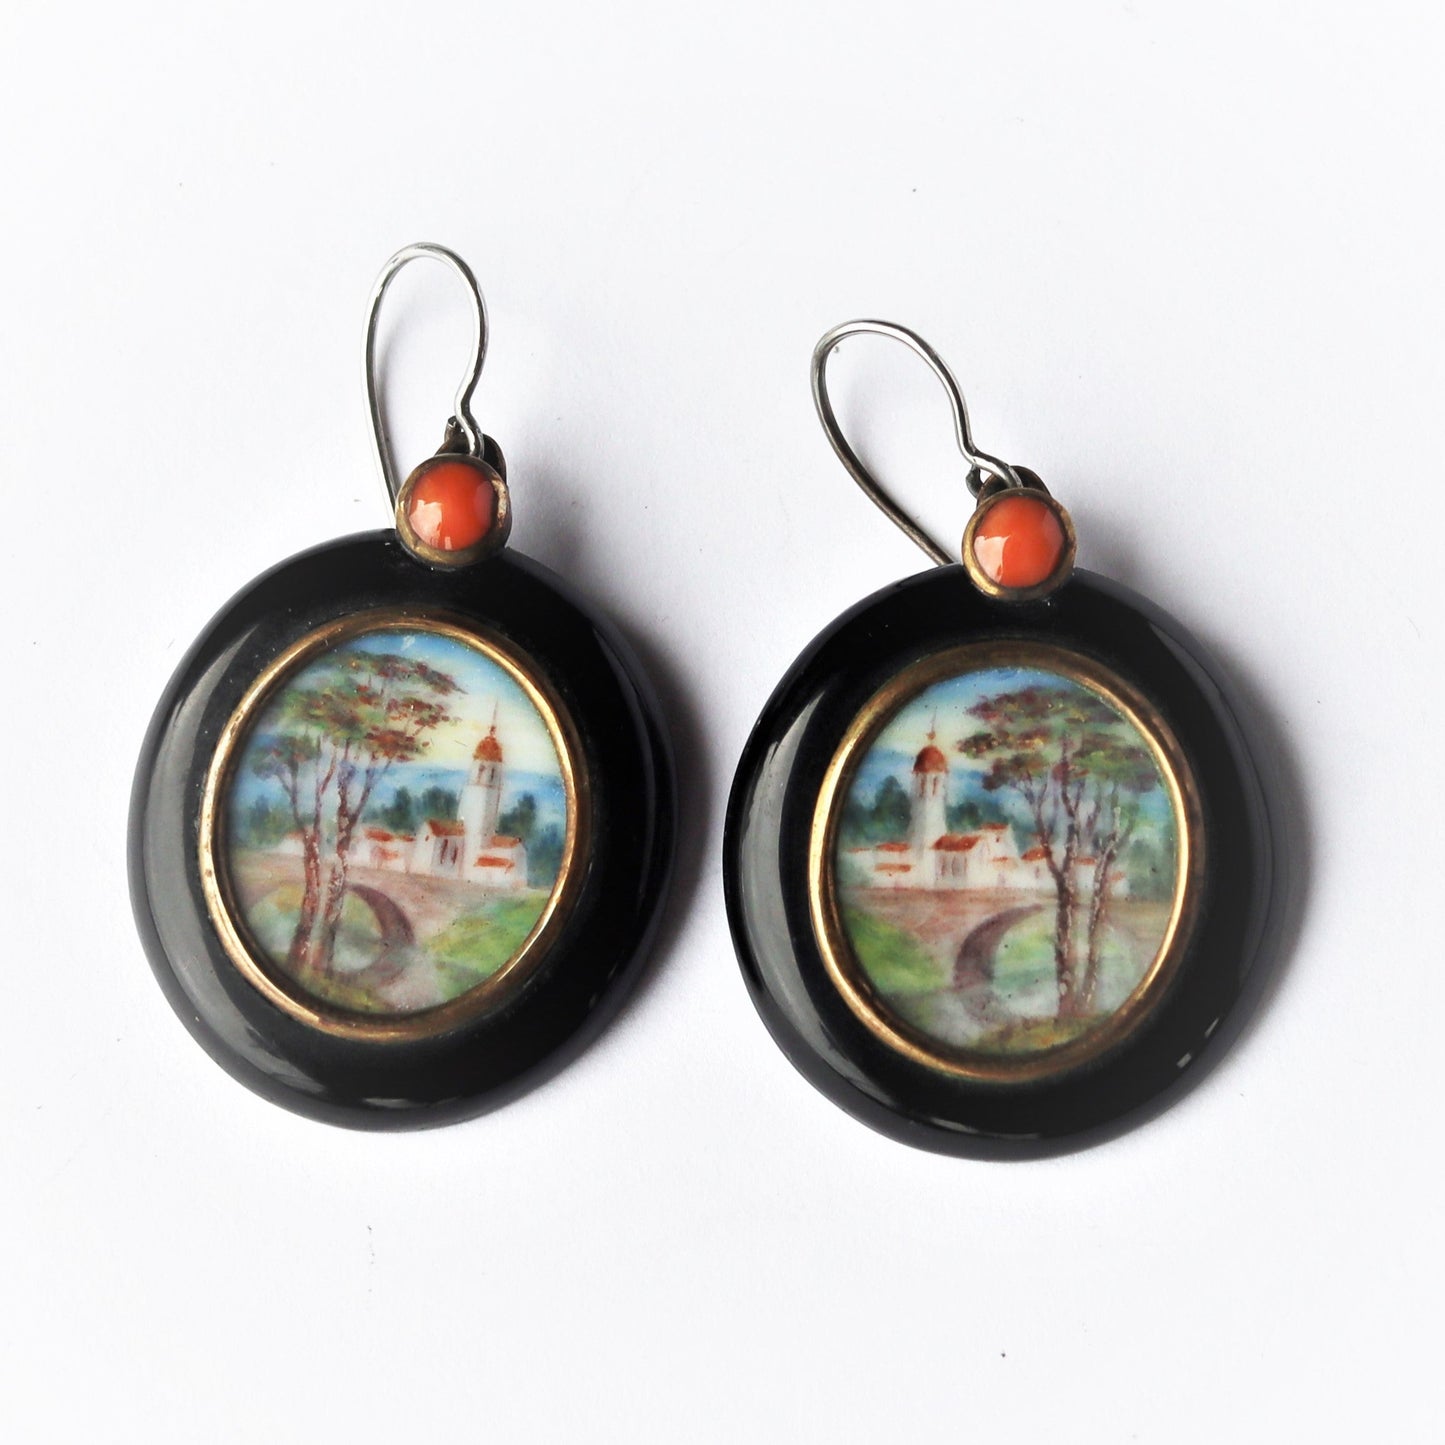 Antique Russian Jet Gold and Coral Earrings w/ Hand Painted Miniature Landscape